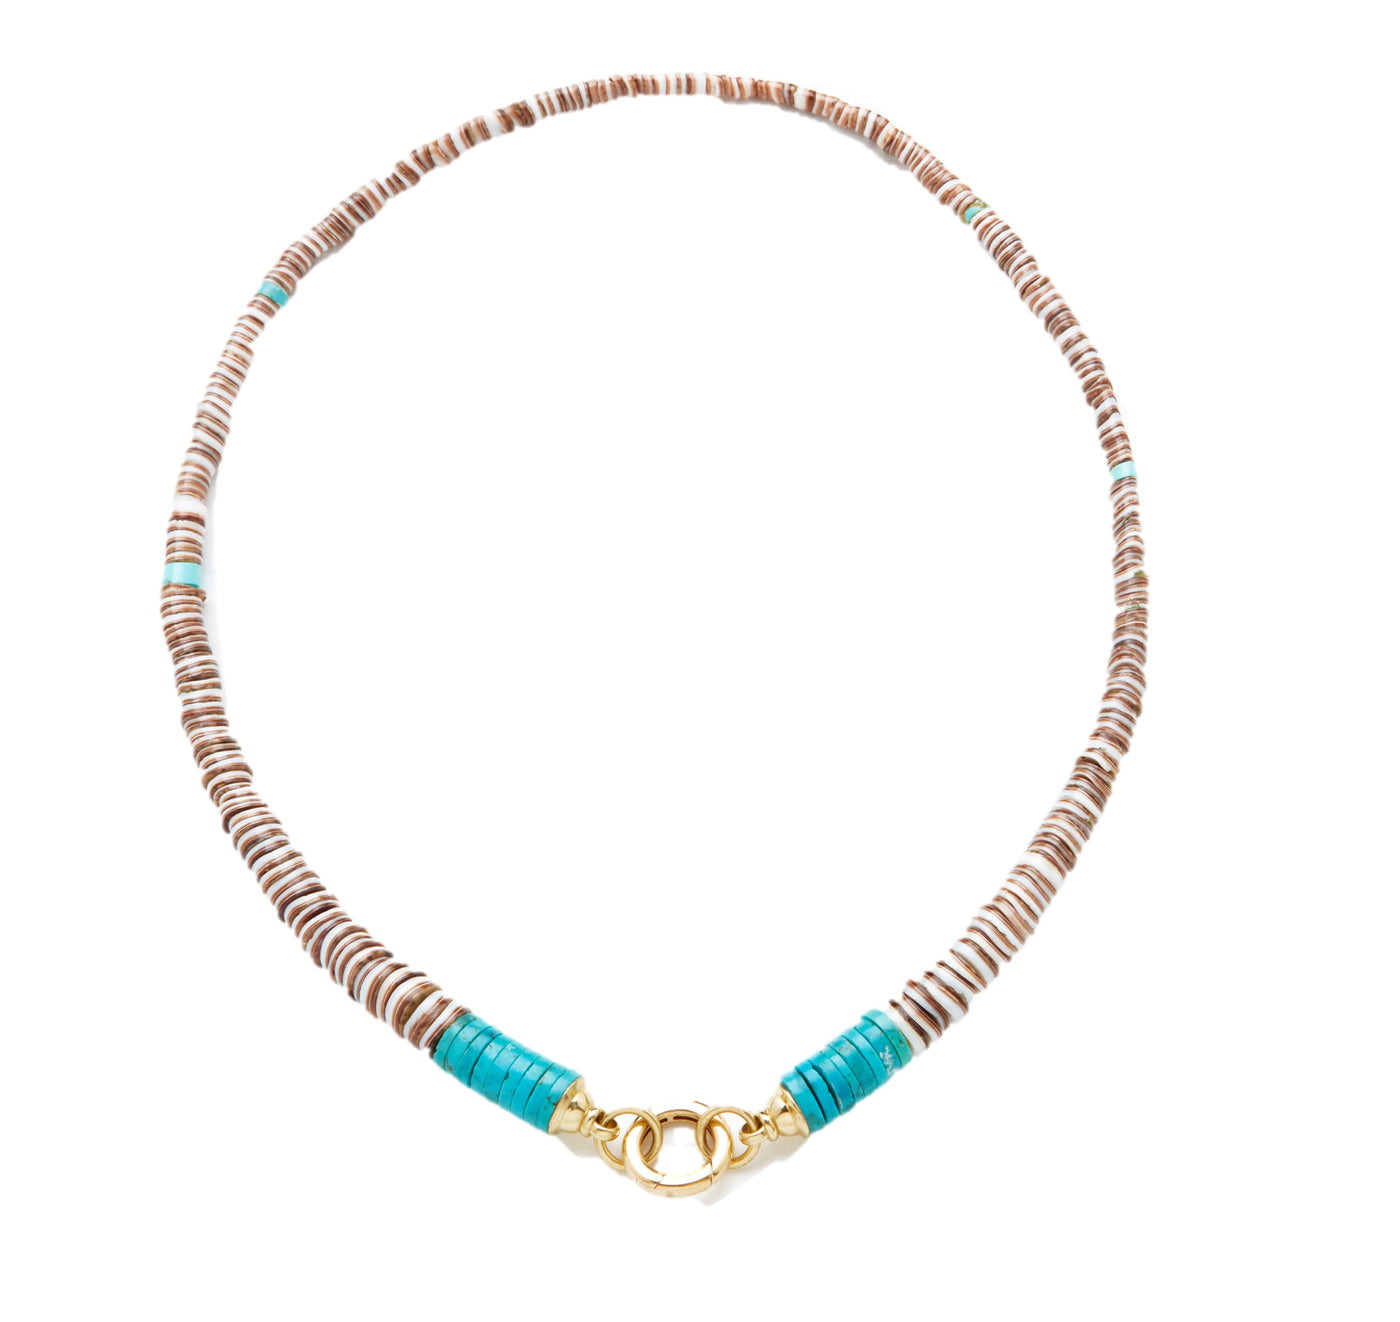 Beaded Necklace with Gold Charm Clasp